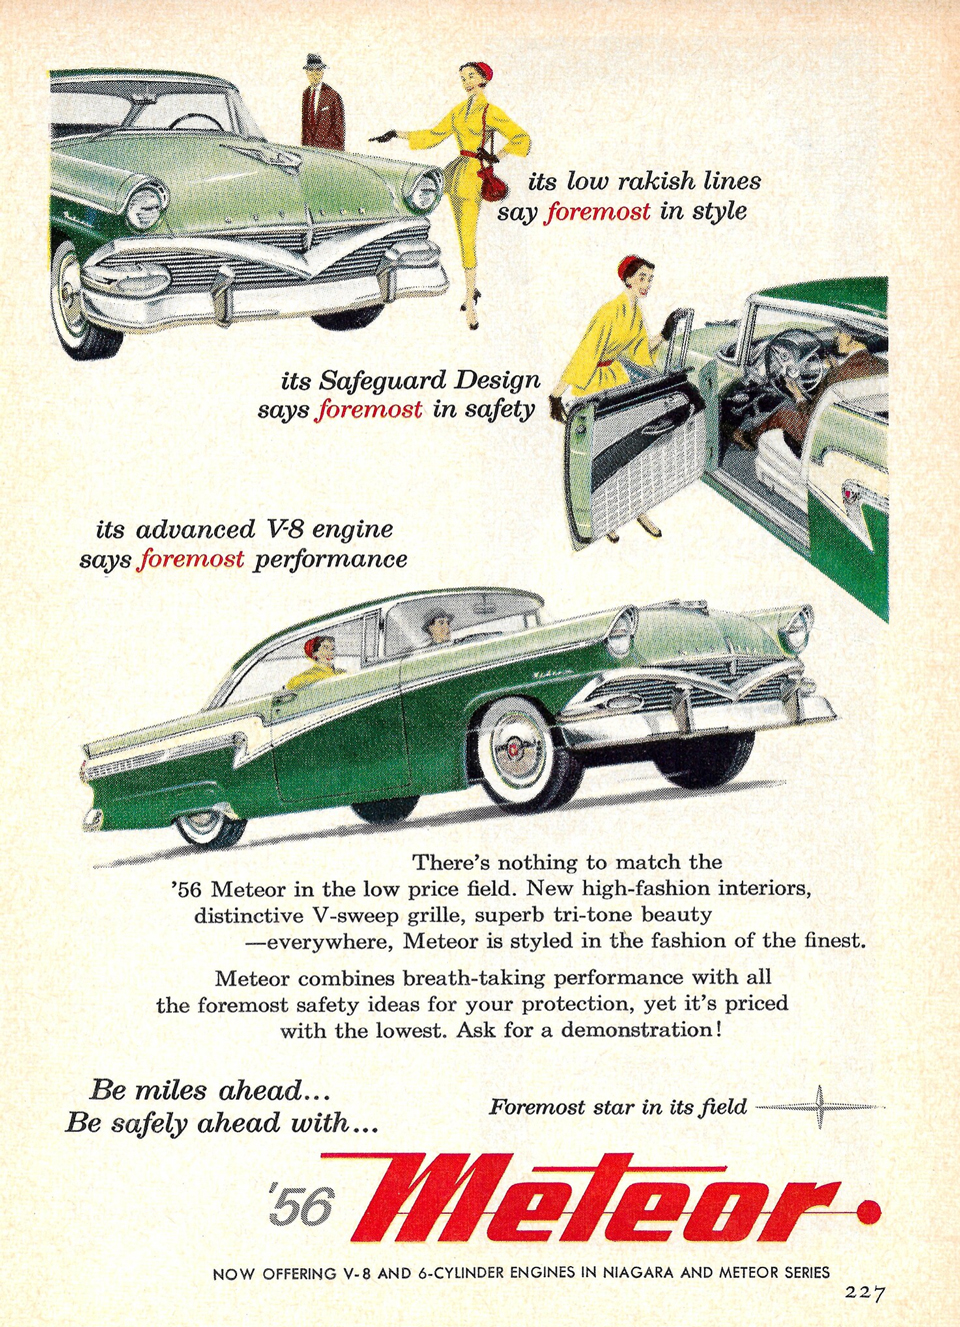 Original 1956 Meteor ad "Now offering V-8 and 6-cylinder engines in Niagara and Meteor series"